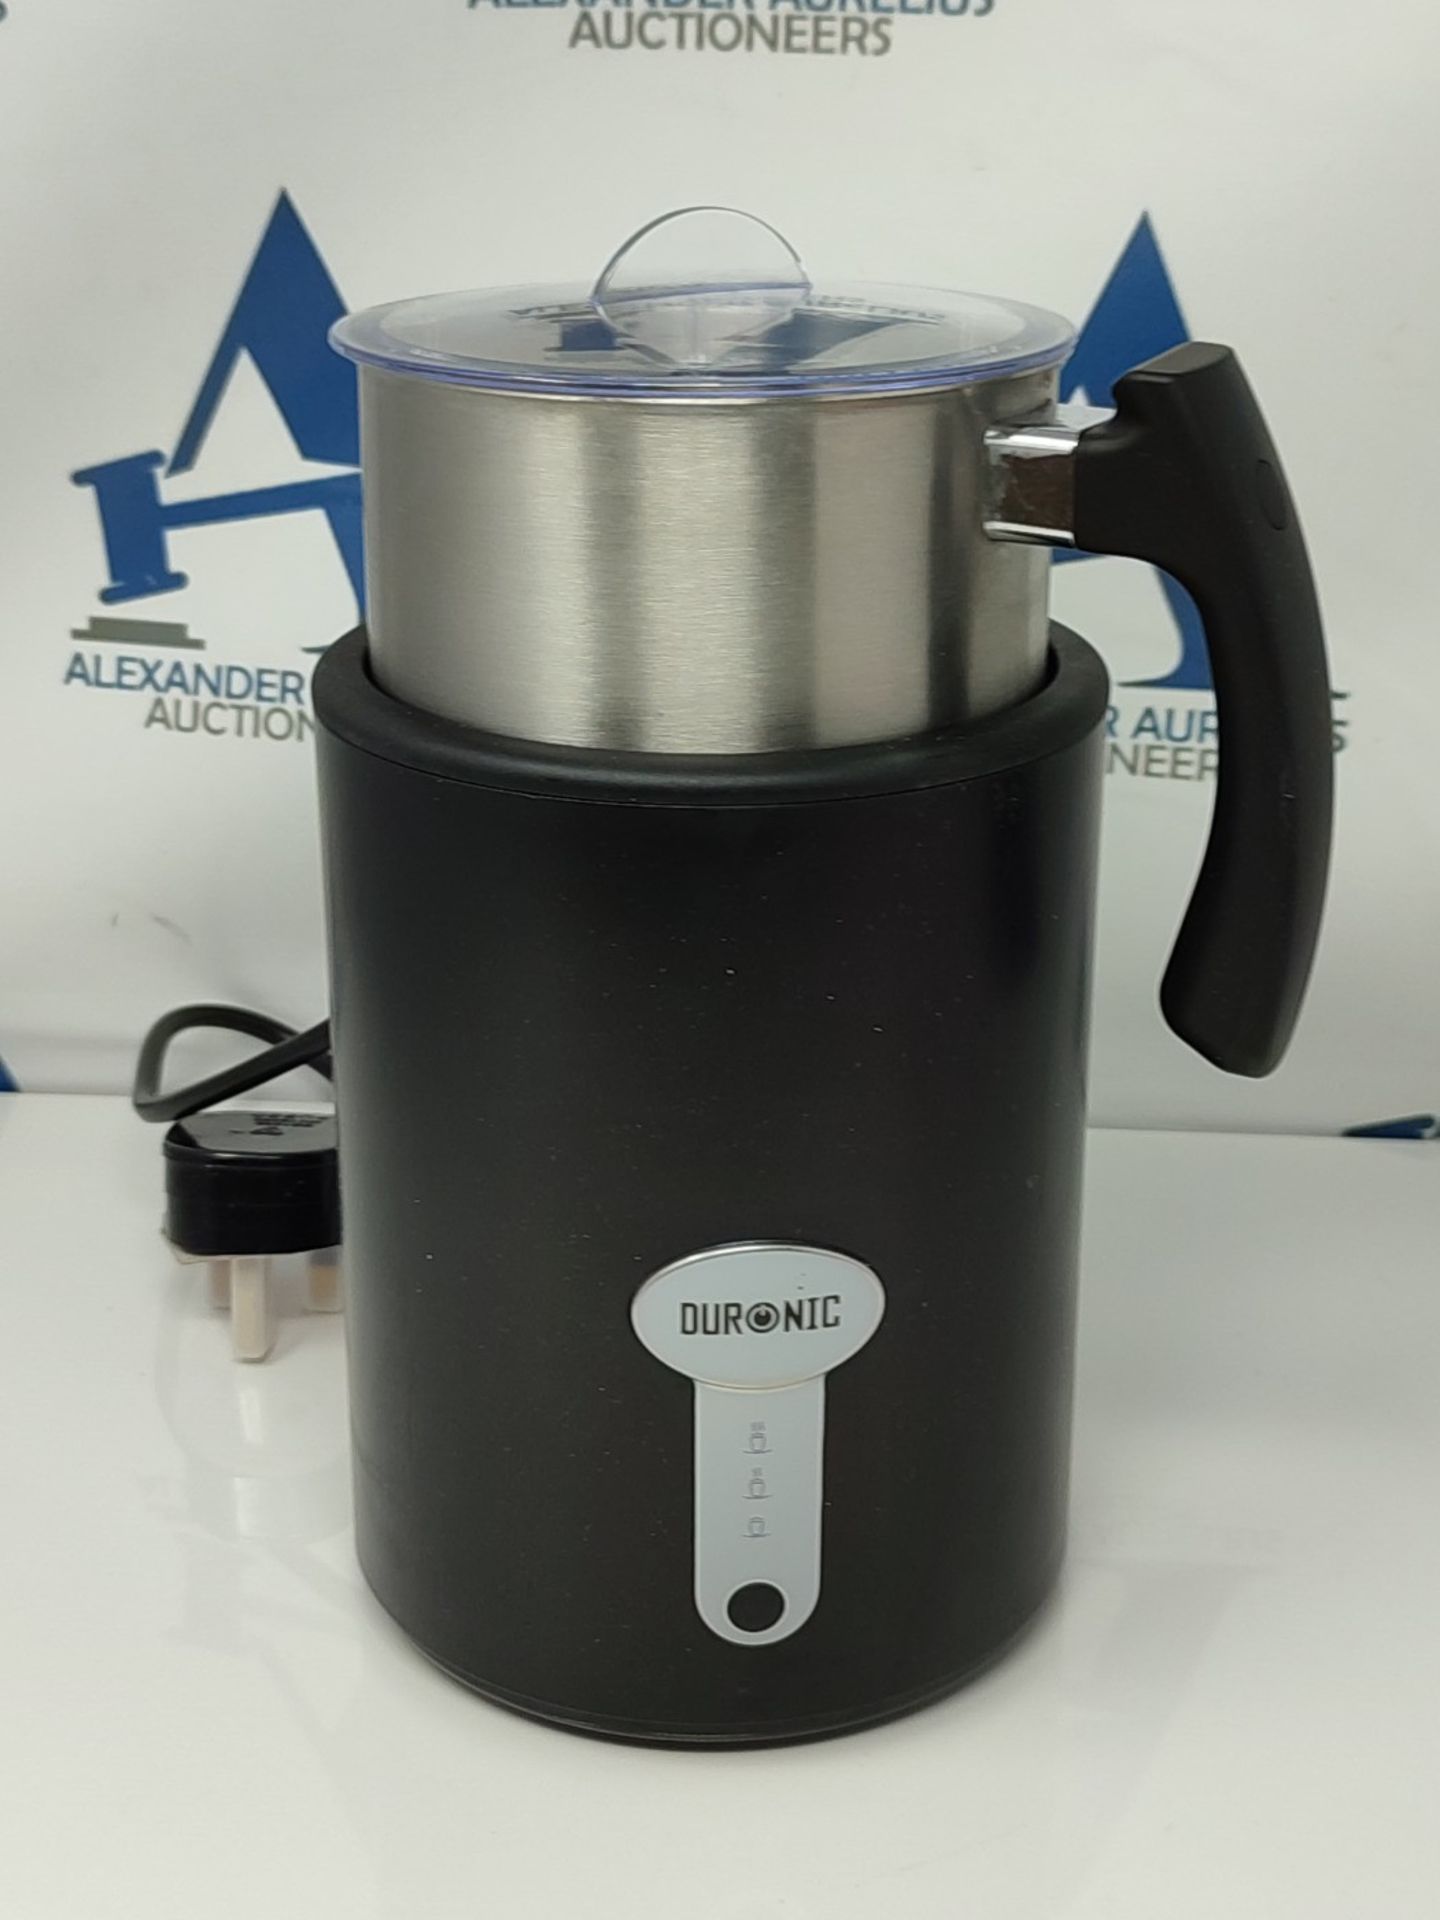 Duronic MF500 BK Milk Frother - 500ml Stainless-Steel Milk Frother Jug, Electric Steam - Image 2 of 2